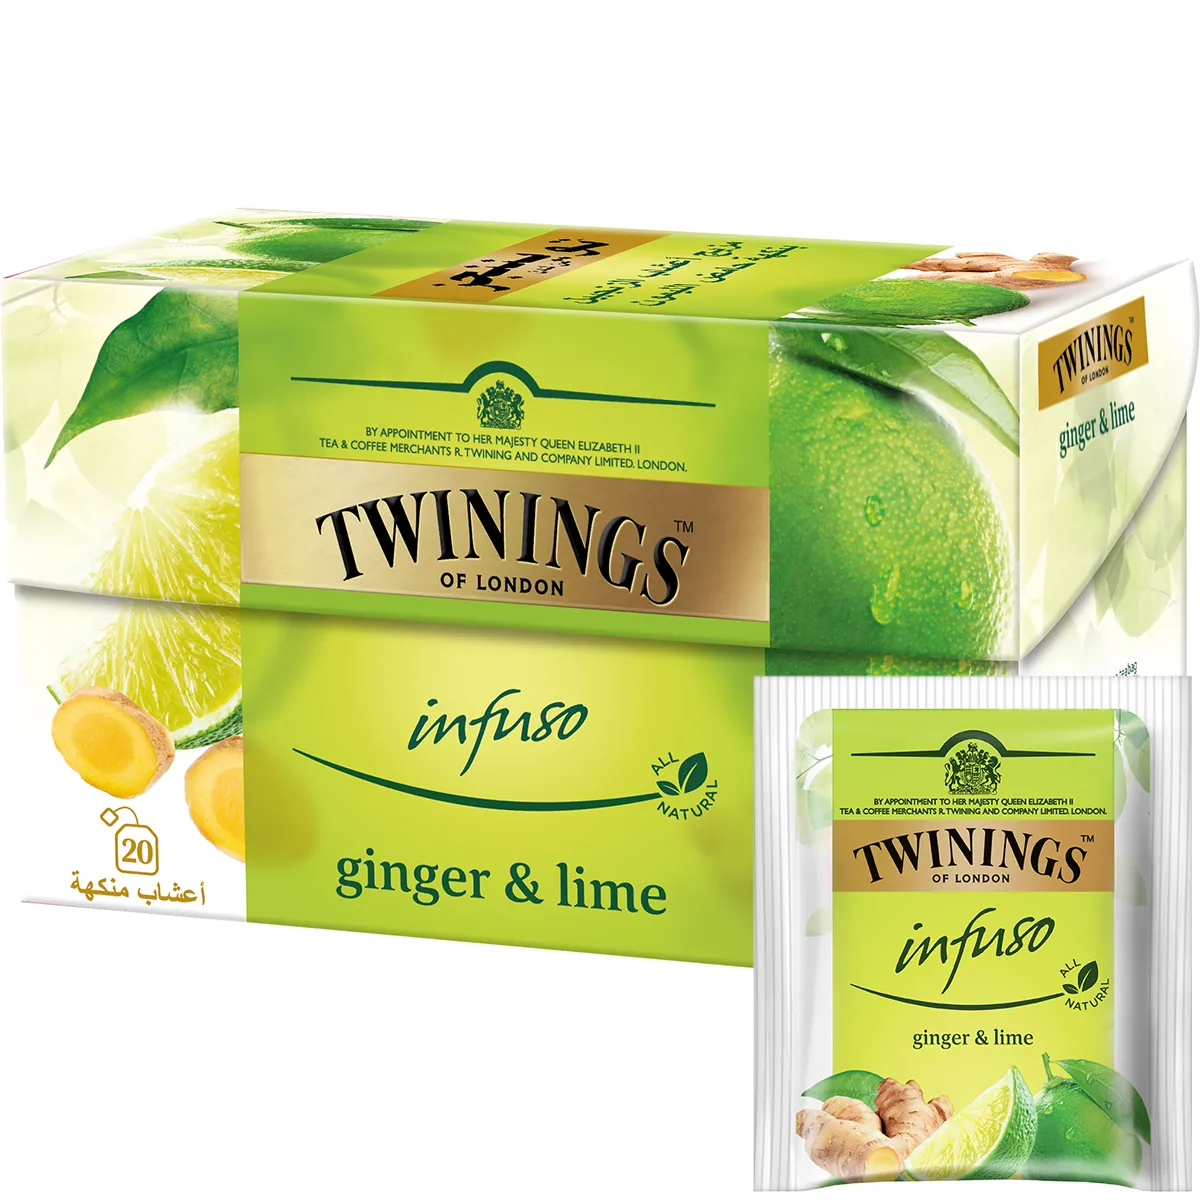 Twinings Infuso Ginger & Lime 20 Tea Bags